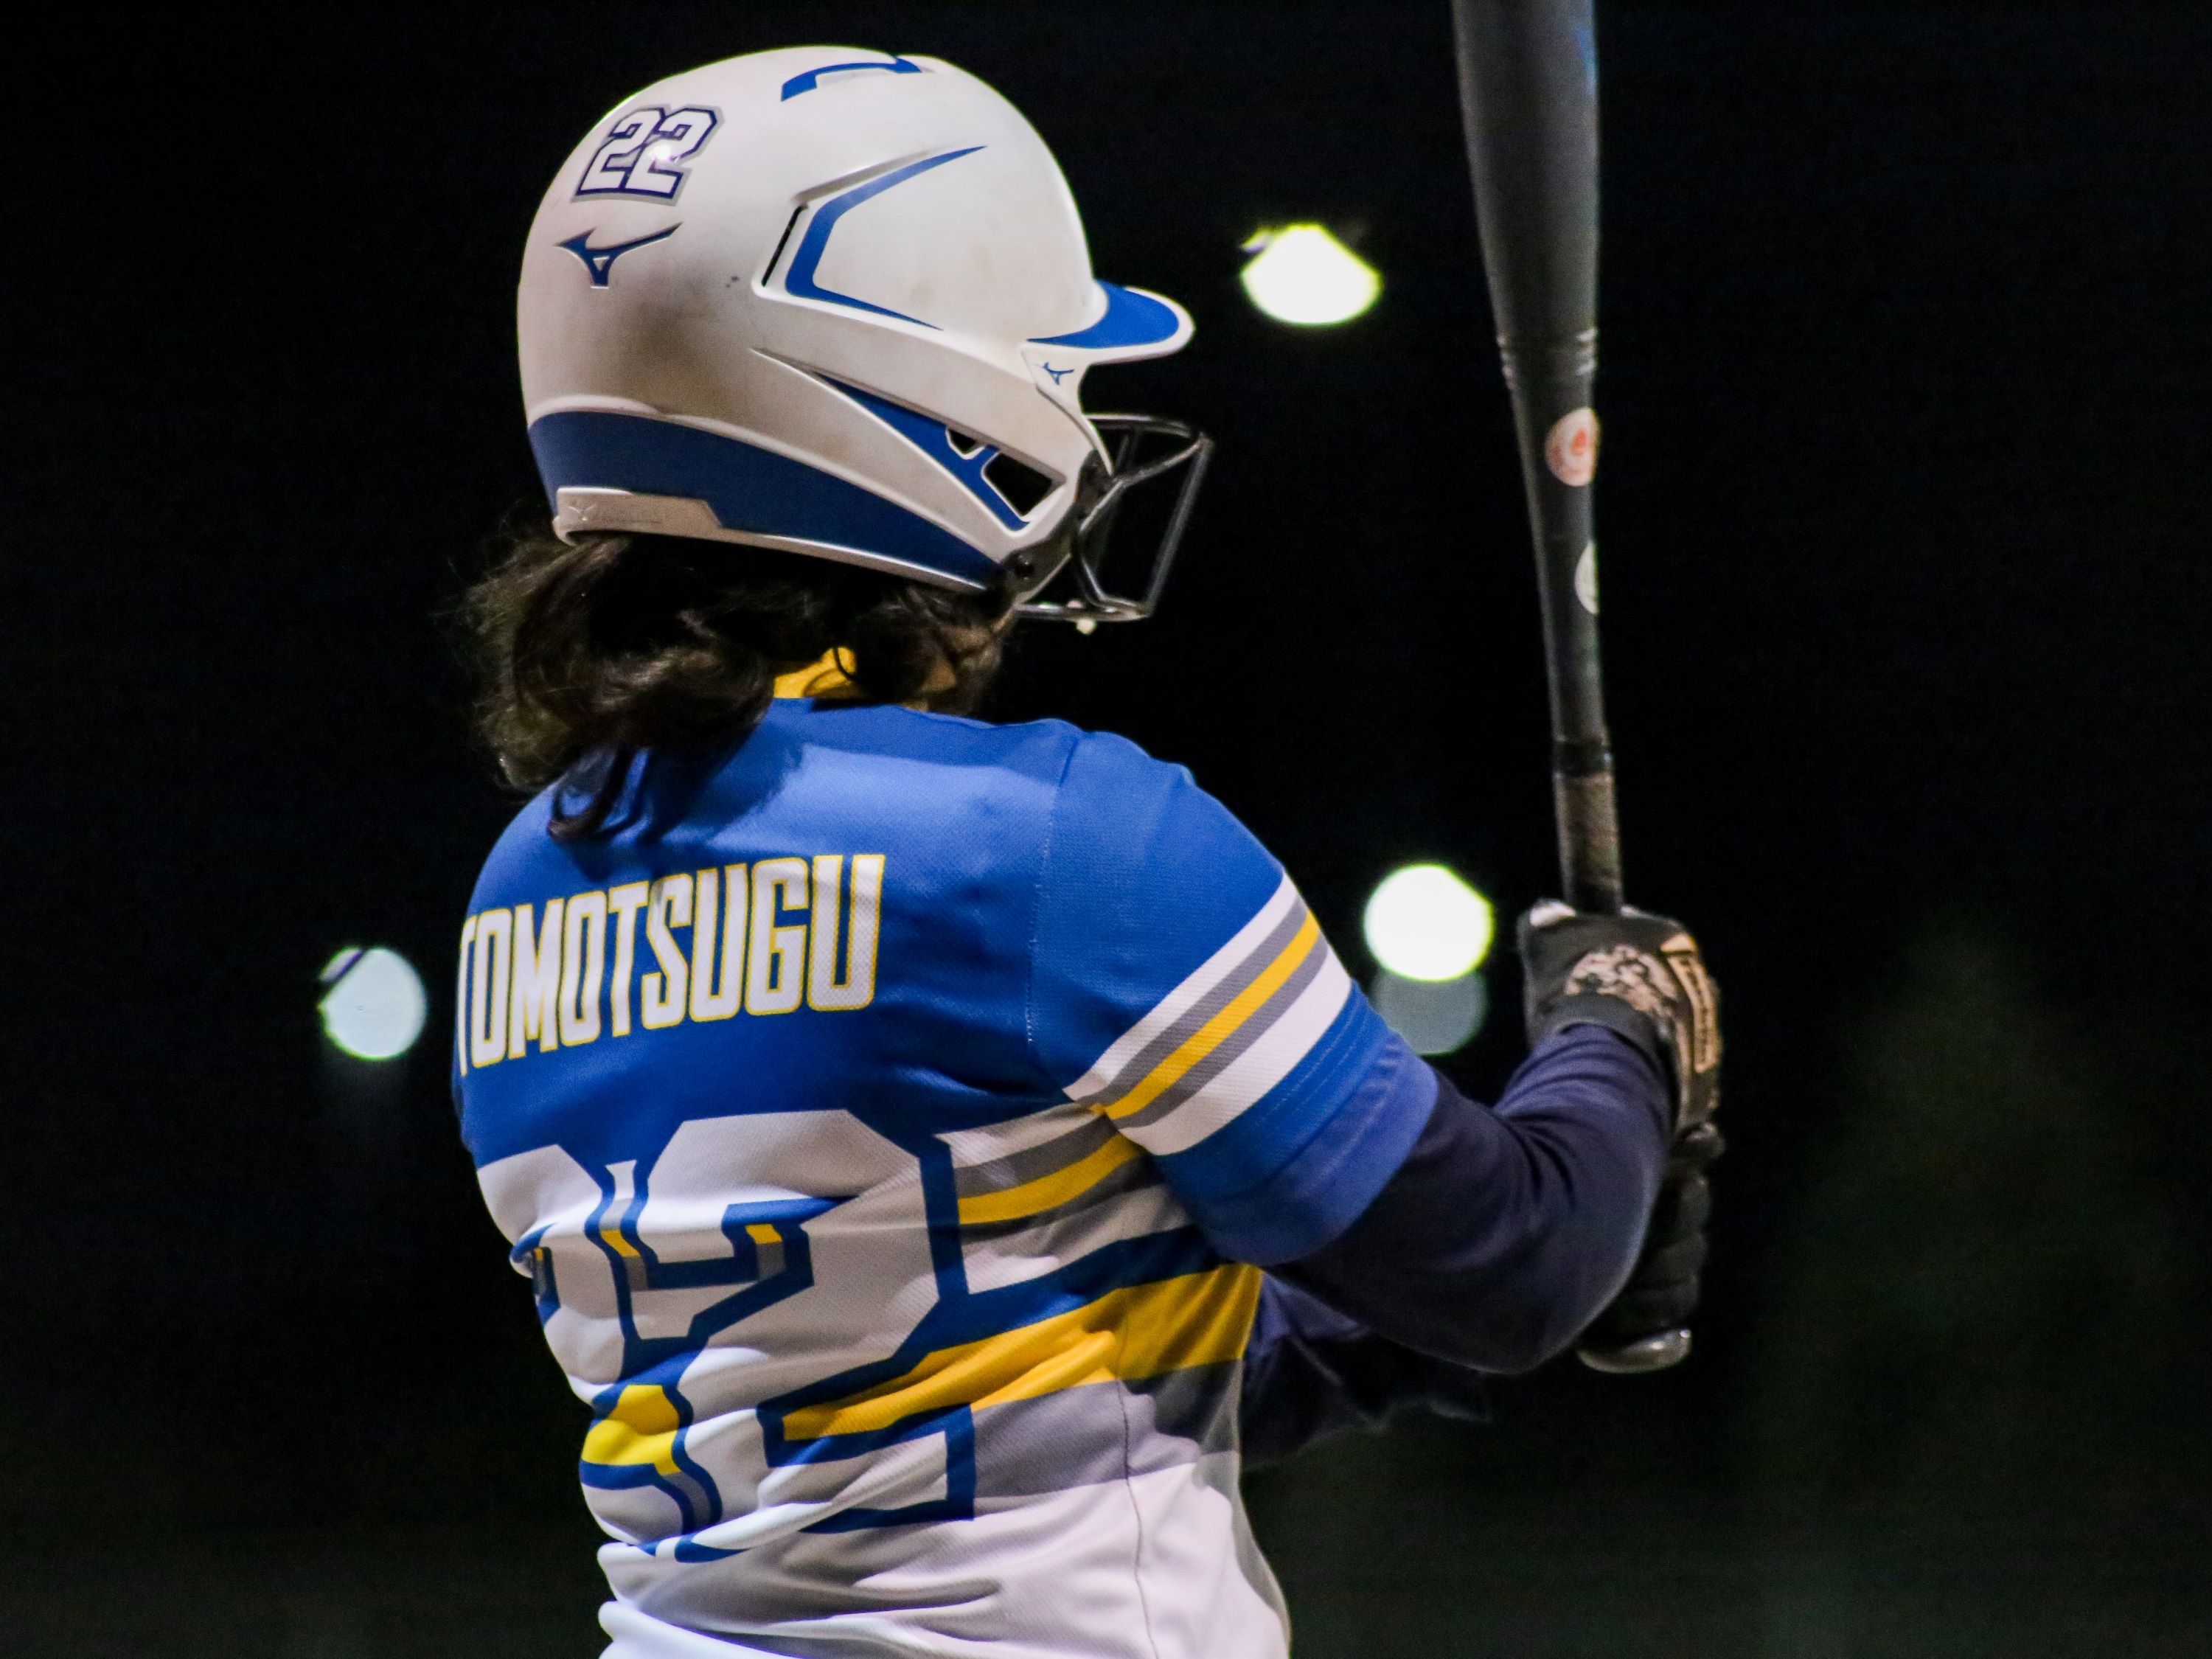 Player in Rams uniform hits the ball with the bat.